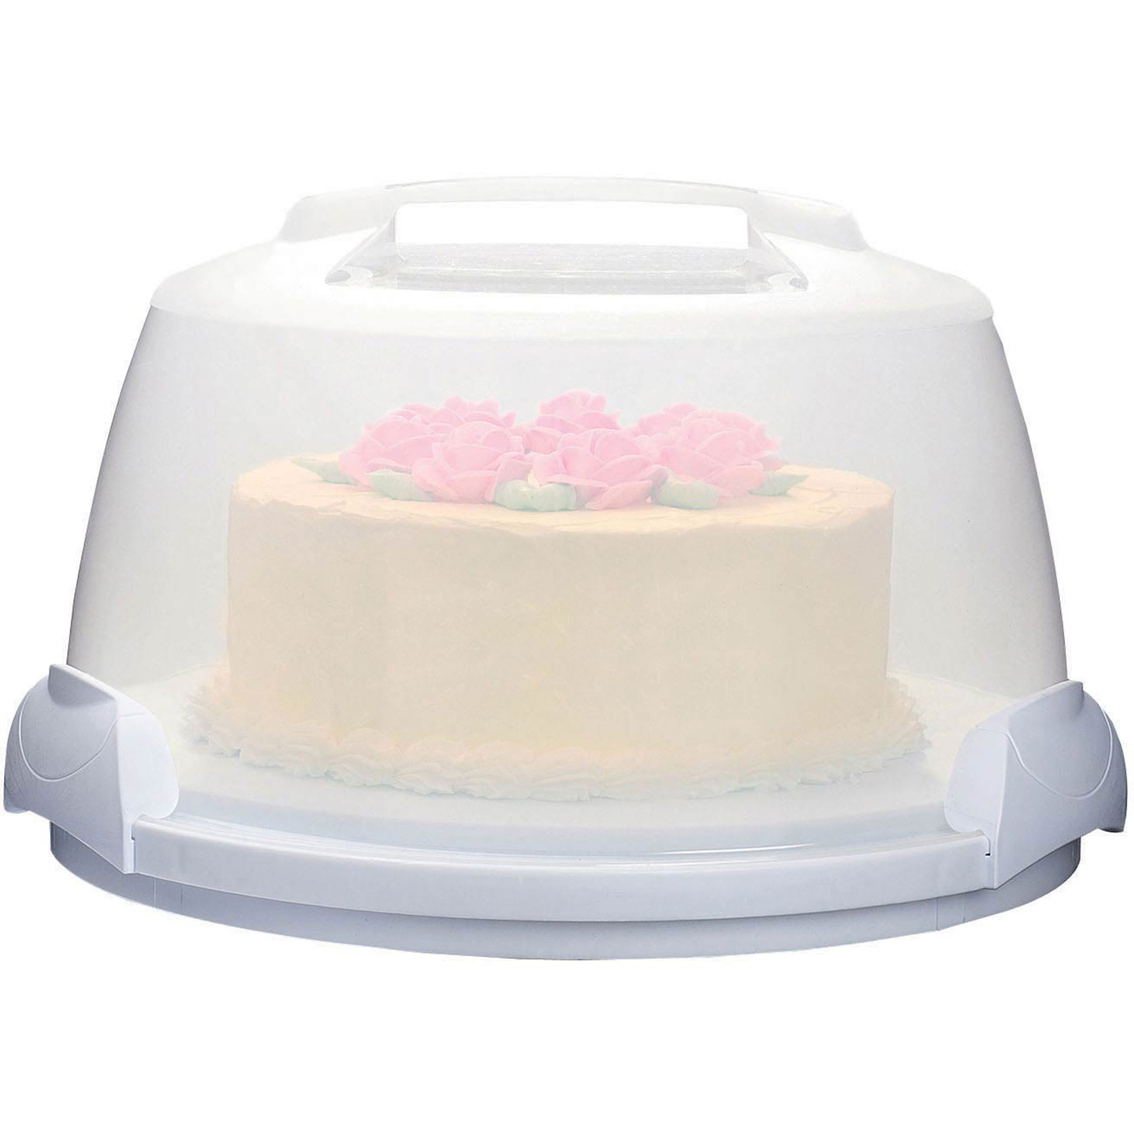 Details about   Wilton Reusable Cake Carrier With Handles 8” X 4” Transportar Boite  New 